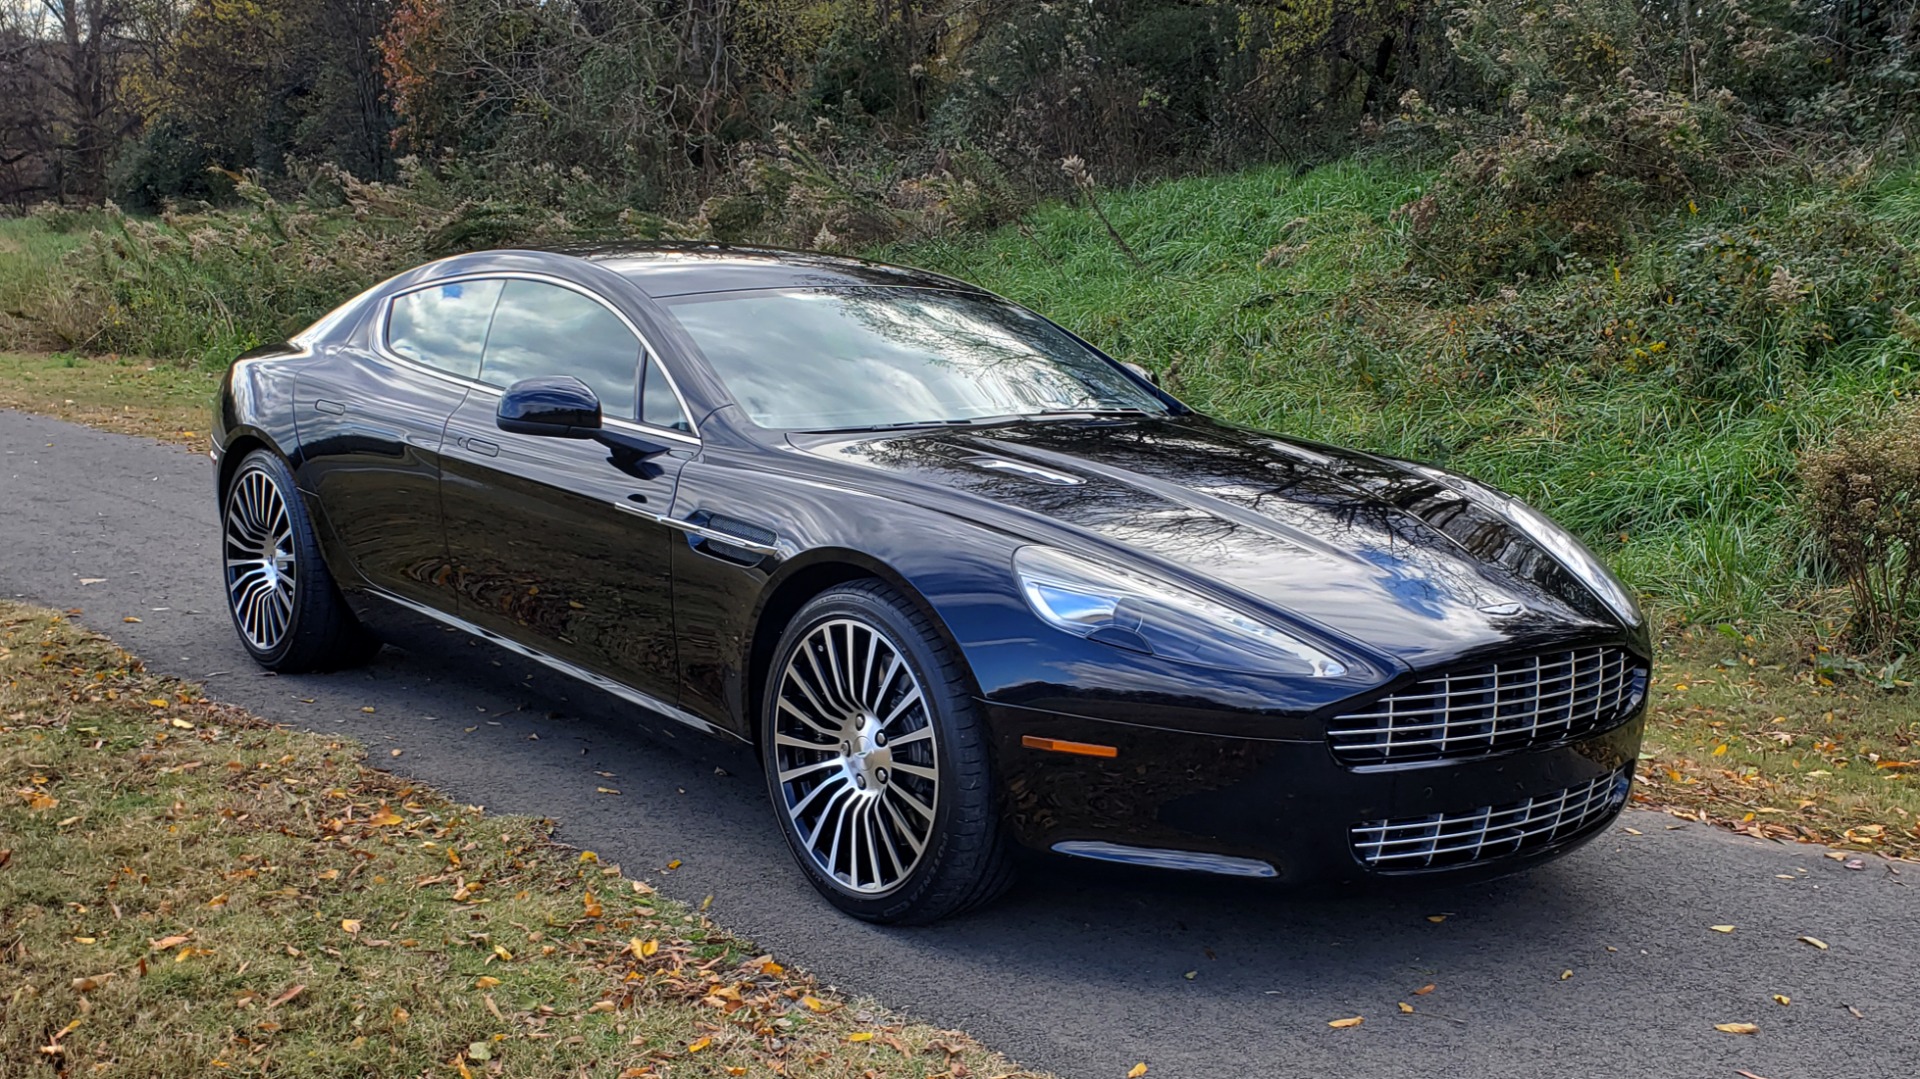 Used 2012 Aston Martin RAPIDE LUXURY 6.0L V12 / NAV / B&O SND / ENTERTAINMENT / REARVIEW for sale Sold at Formula Imports in Charlotte NC 28227 4